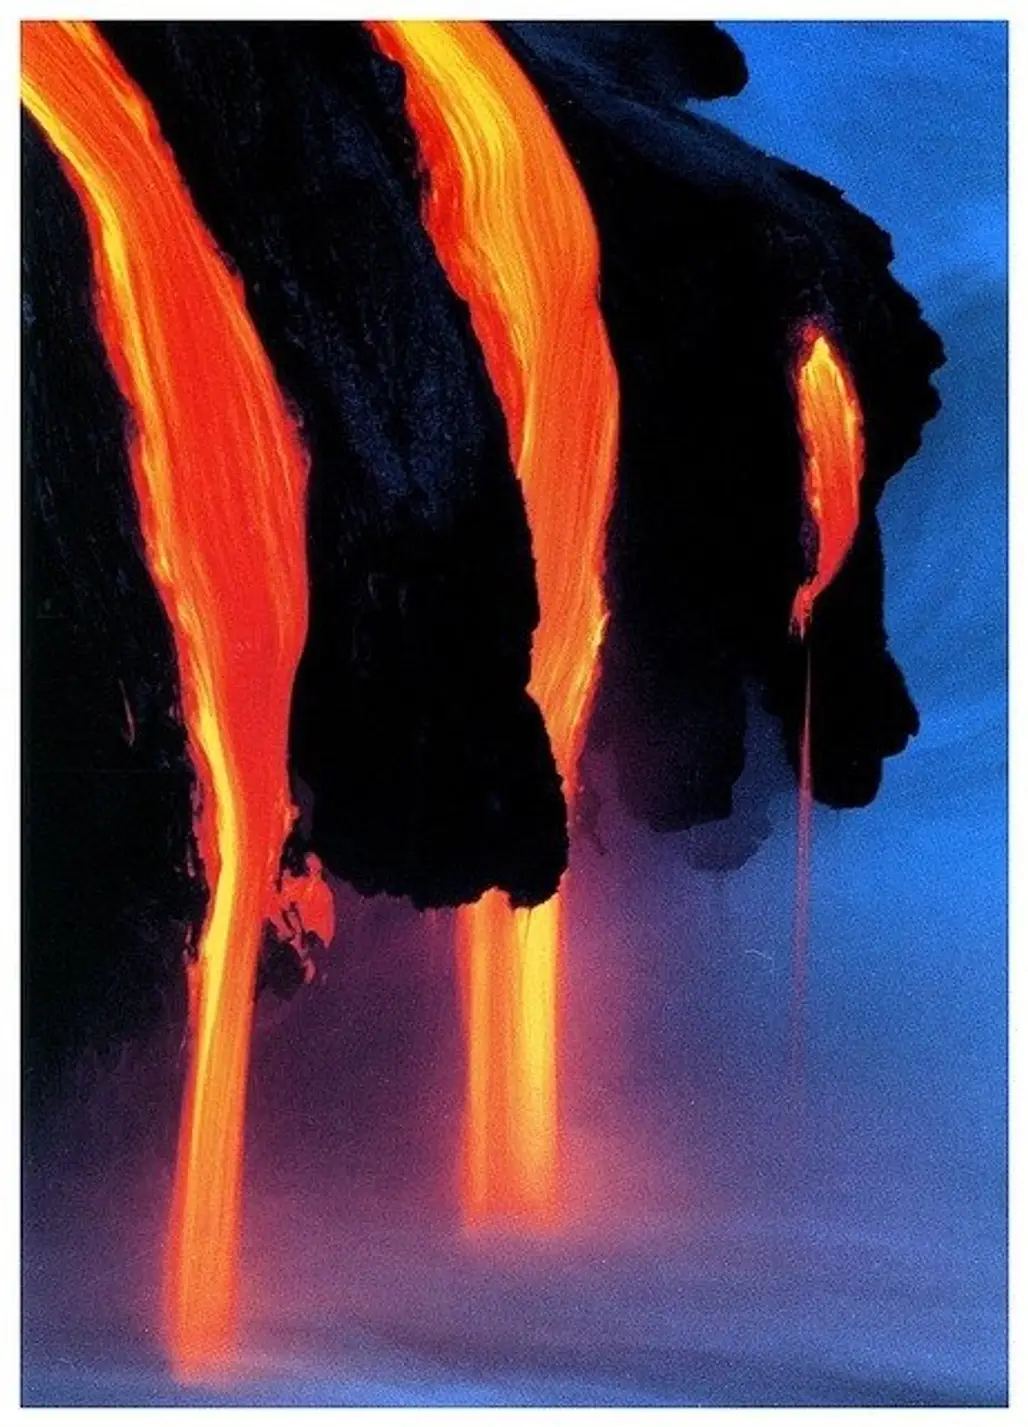 Lava Flowing into the Ocean